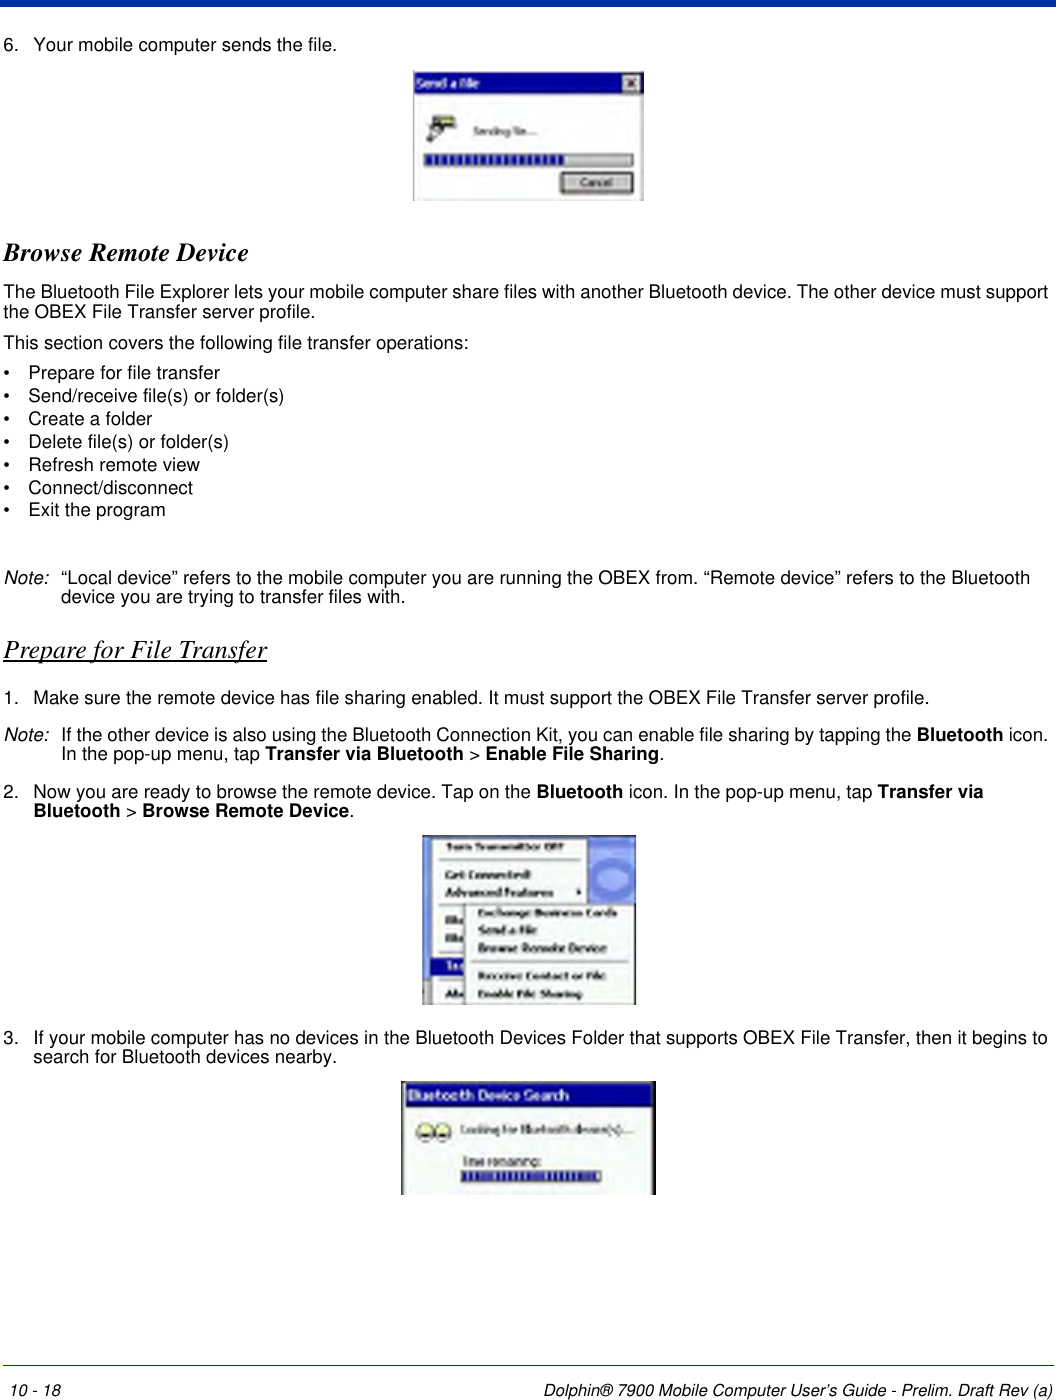 10 - 18 Dolphin® 7900 Mobile Computer User’s Guide - Prelim. Draft Rev (a)6. Your mobile computer sends the file.Browse Remote DeviceThe Bluetooth File Explorer lets your mobile computer share files with another Bluetooth device. The other device must support the OBEX File Transfer server profile.This section covers the following file transfer operations:•           Prepare for file transfer•           Send/receive file(s) or folder(s)•           Create a folder•           Delete file(s) or folder(s)•           Refresh remote view•           Connect/disconnect•           Exit the programNote: “Local device” refers to the mobile computer you are running the OBEX from. “Remote device” refers to the Bluetooth device you are trying to transfer files with.Prepare for File Transfer1. Make sure the remote device has file sharing enabled. It must support the OBEX File Transfer server profile.Note: If the other device is also using the Bluetooth Connection Kit, you can enable file sharing by tapping the Bluetooth icon. In the pop-up menu, tap Transfer via Bluetooth &gt; Enable File Sharing.2. Now you are ready to browse the remote device. Tap on the Bluetooth icon. In the pop-up menu, tap Transfer via Bluetooth &gt; Browse Remote Device.3. If your mobile computer has no devices in the Bluetooth Devices Folder that supports OBEX File Transfer, then it begins to search for Bluetooth devices nearby.